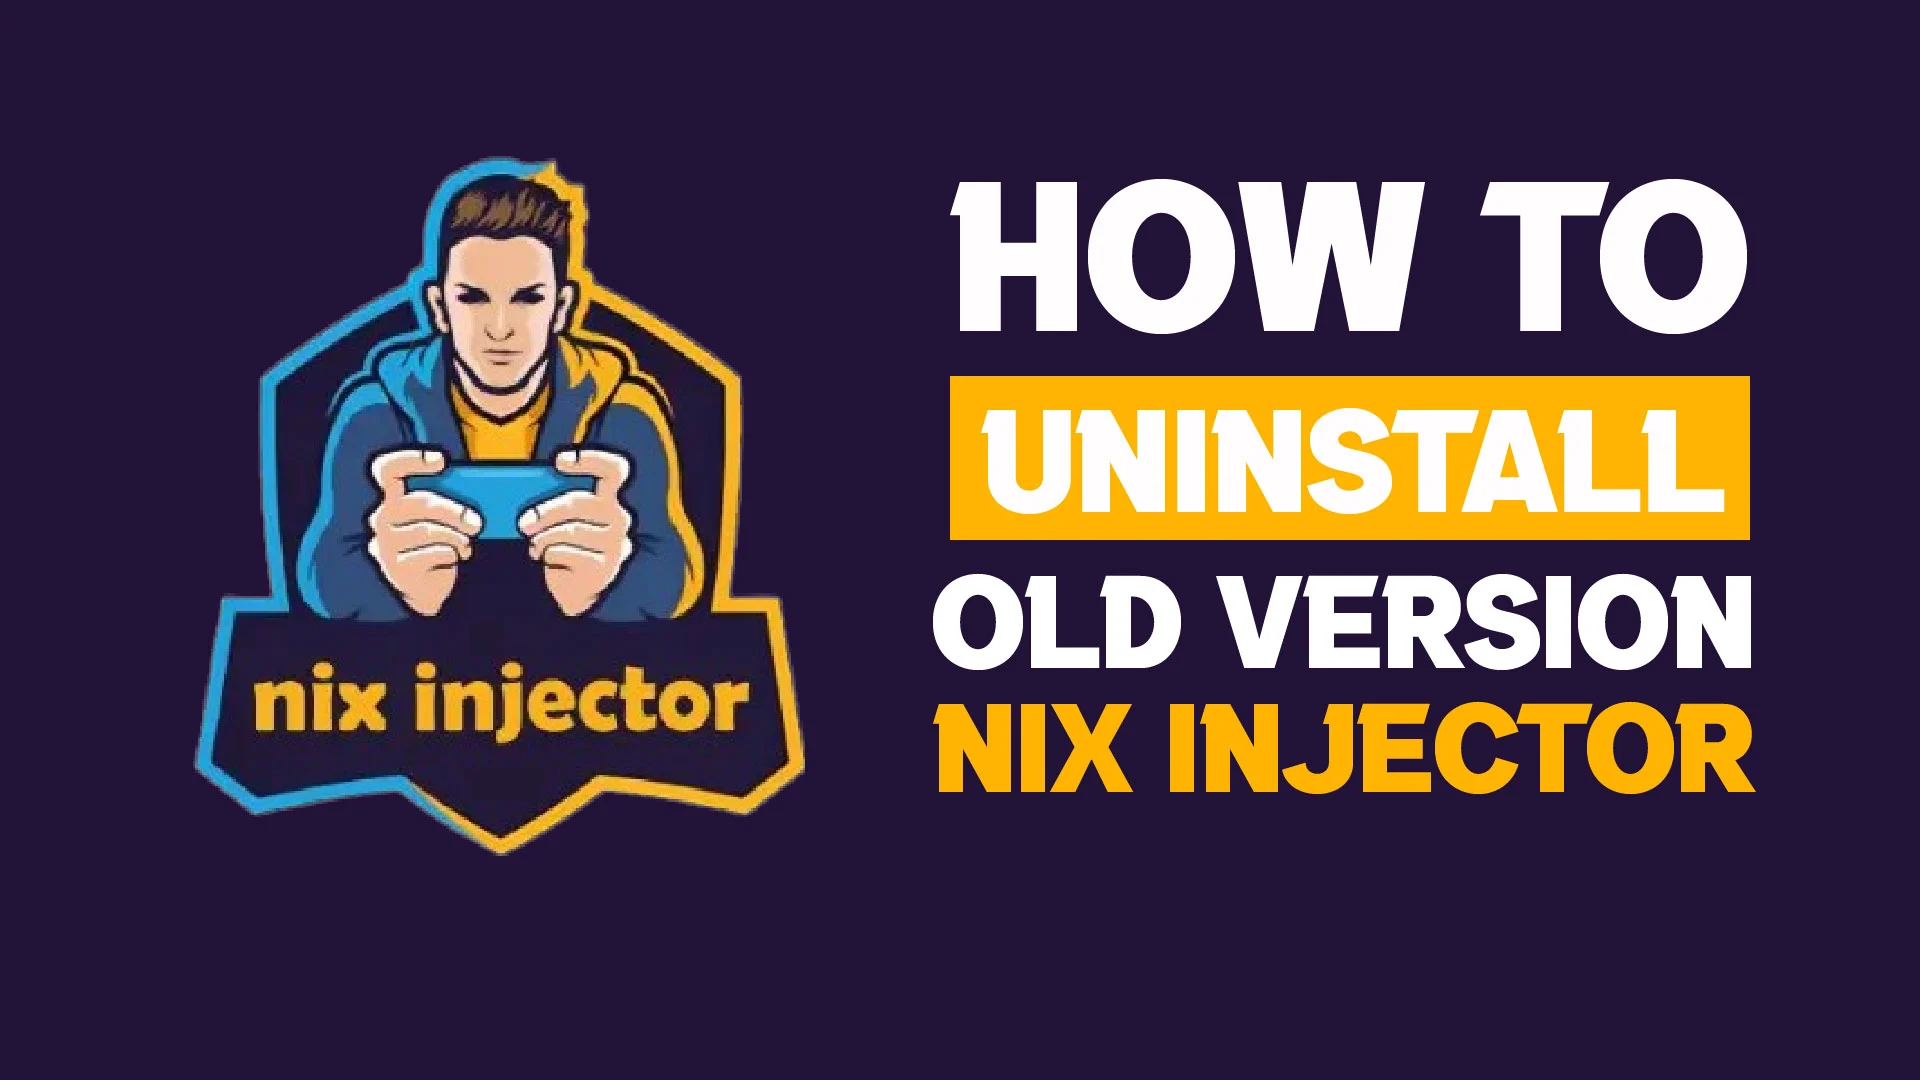 How to uninstall the old Version and install the latest update on the Nix injector app?